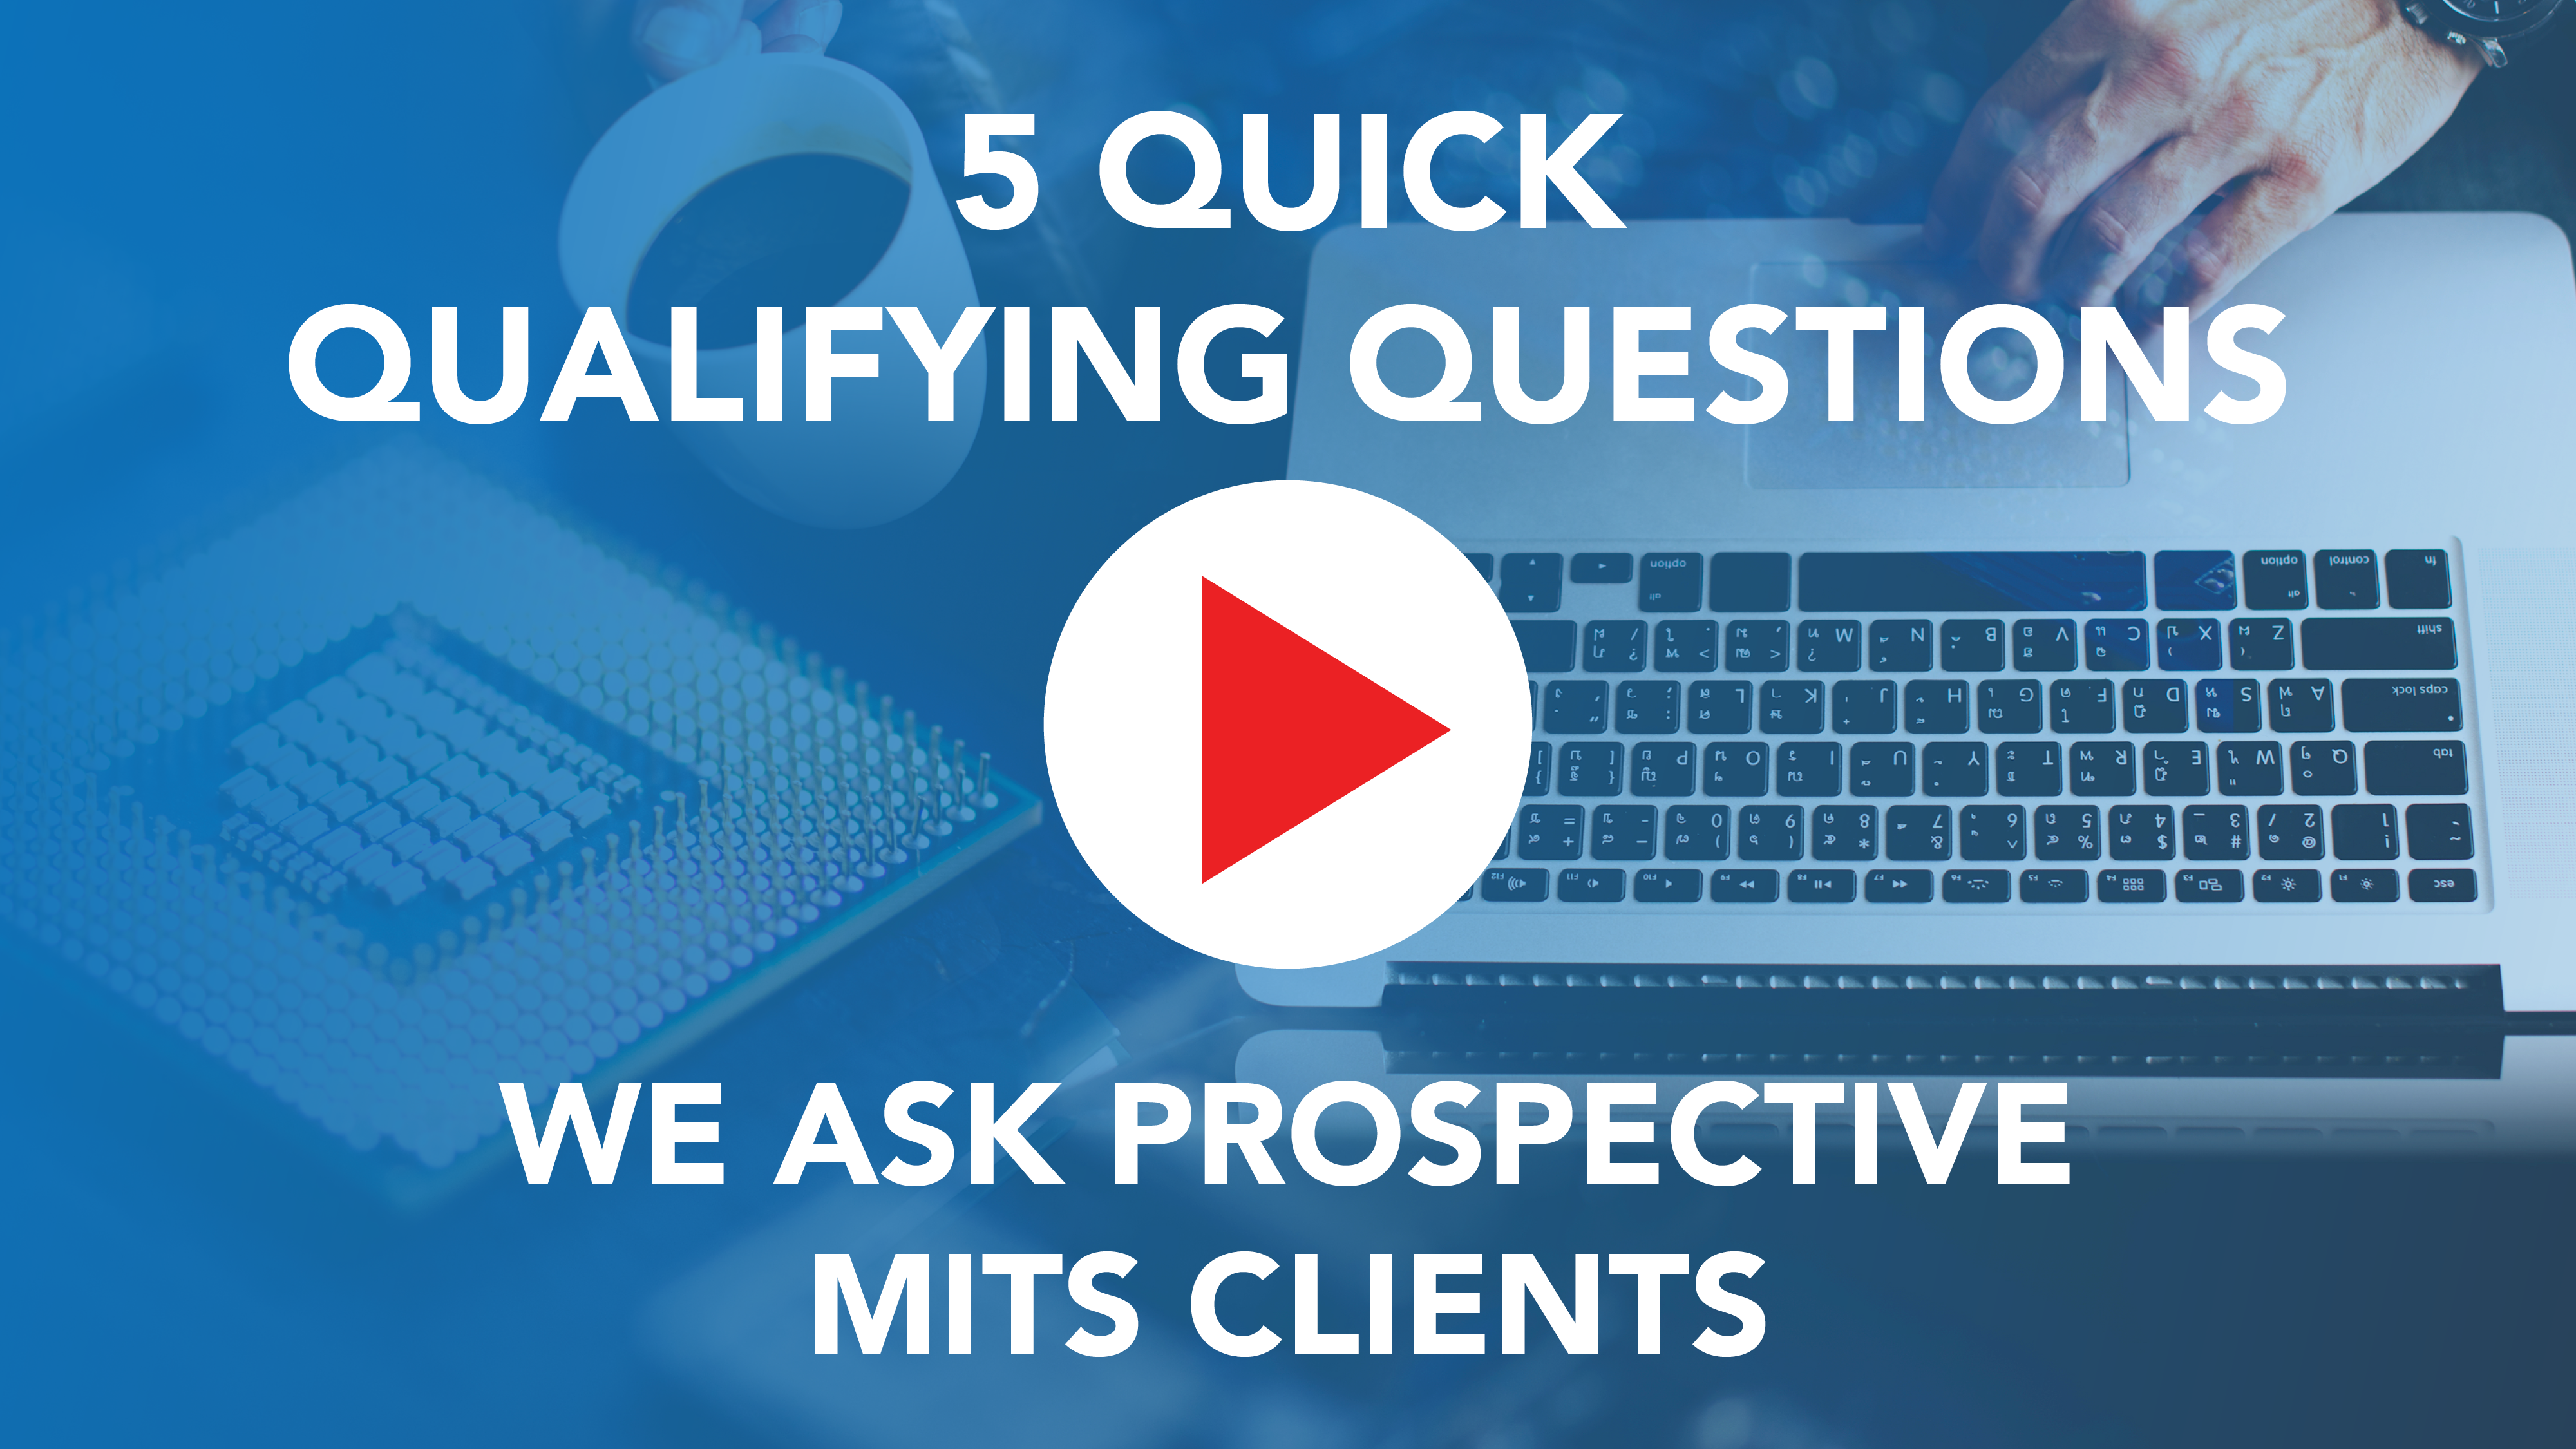 5 Quick Qualifying Questions We Ask Prospective MITS Clients